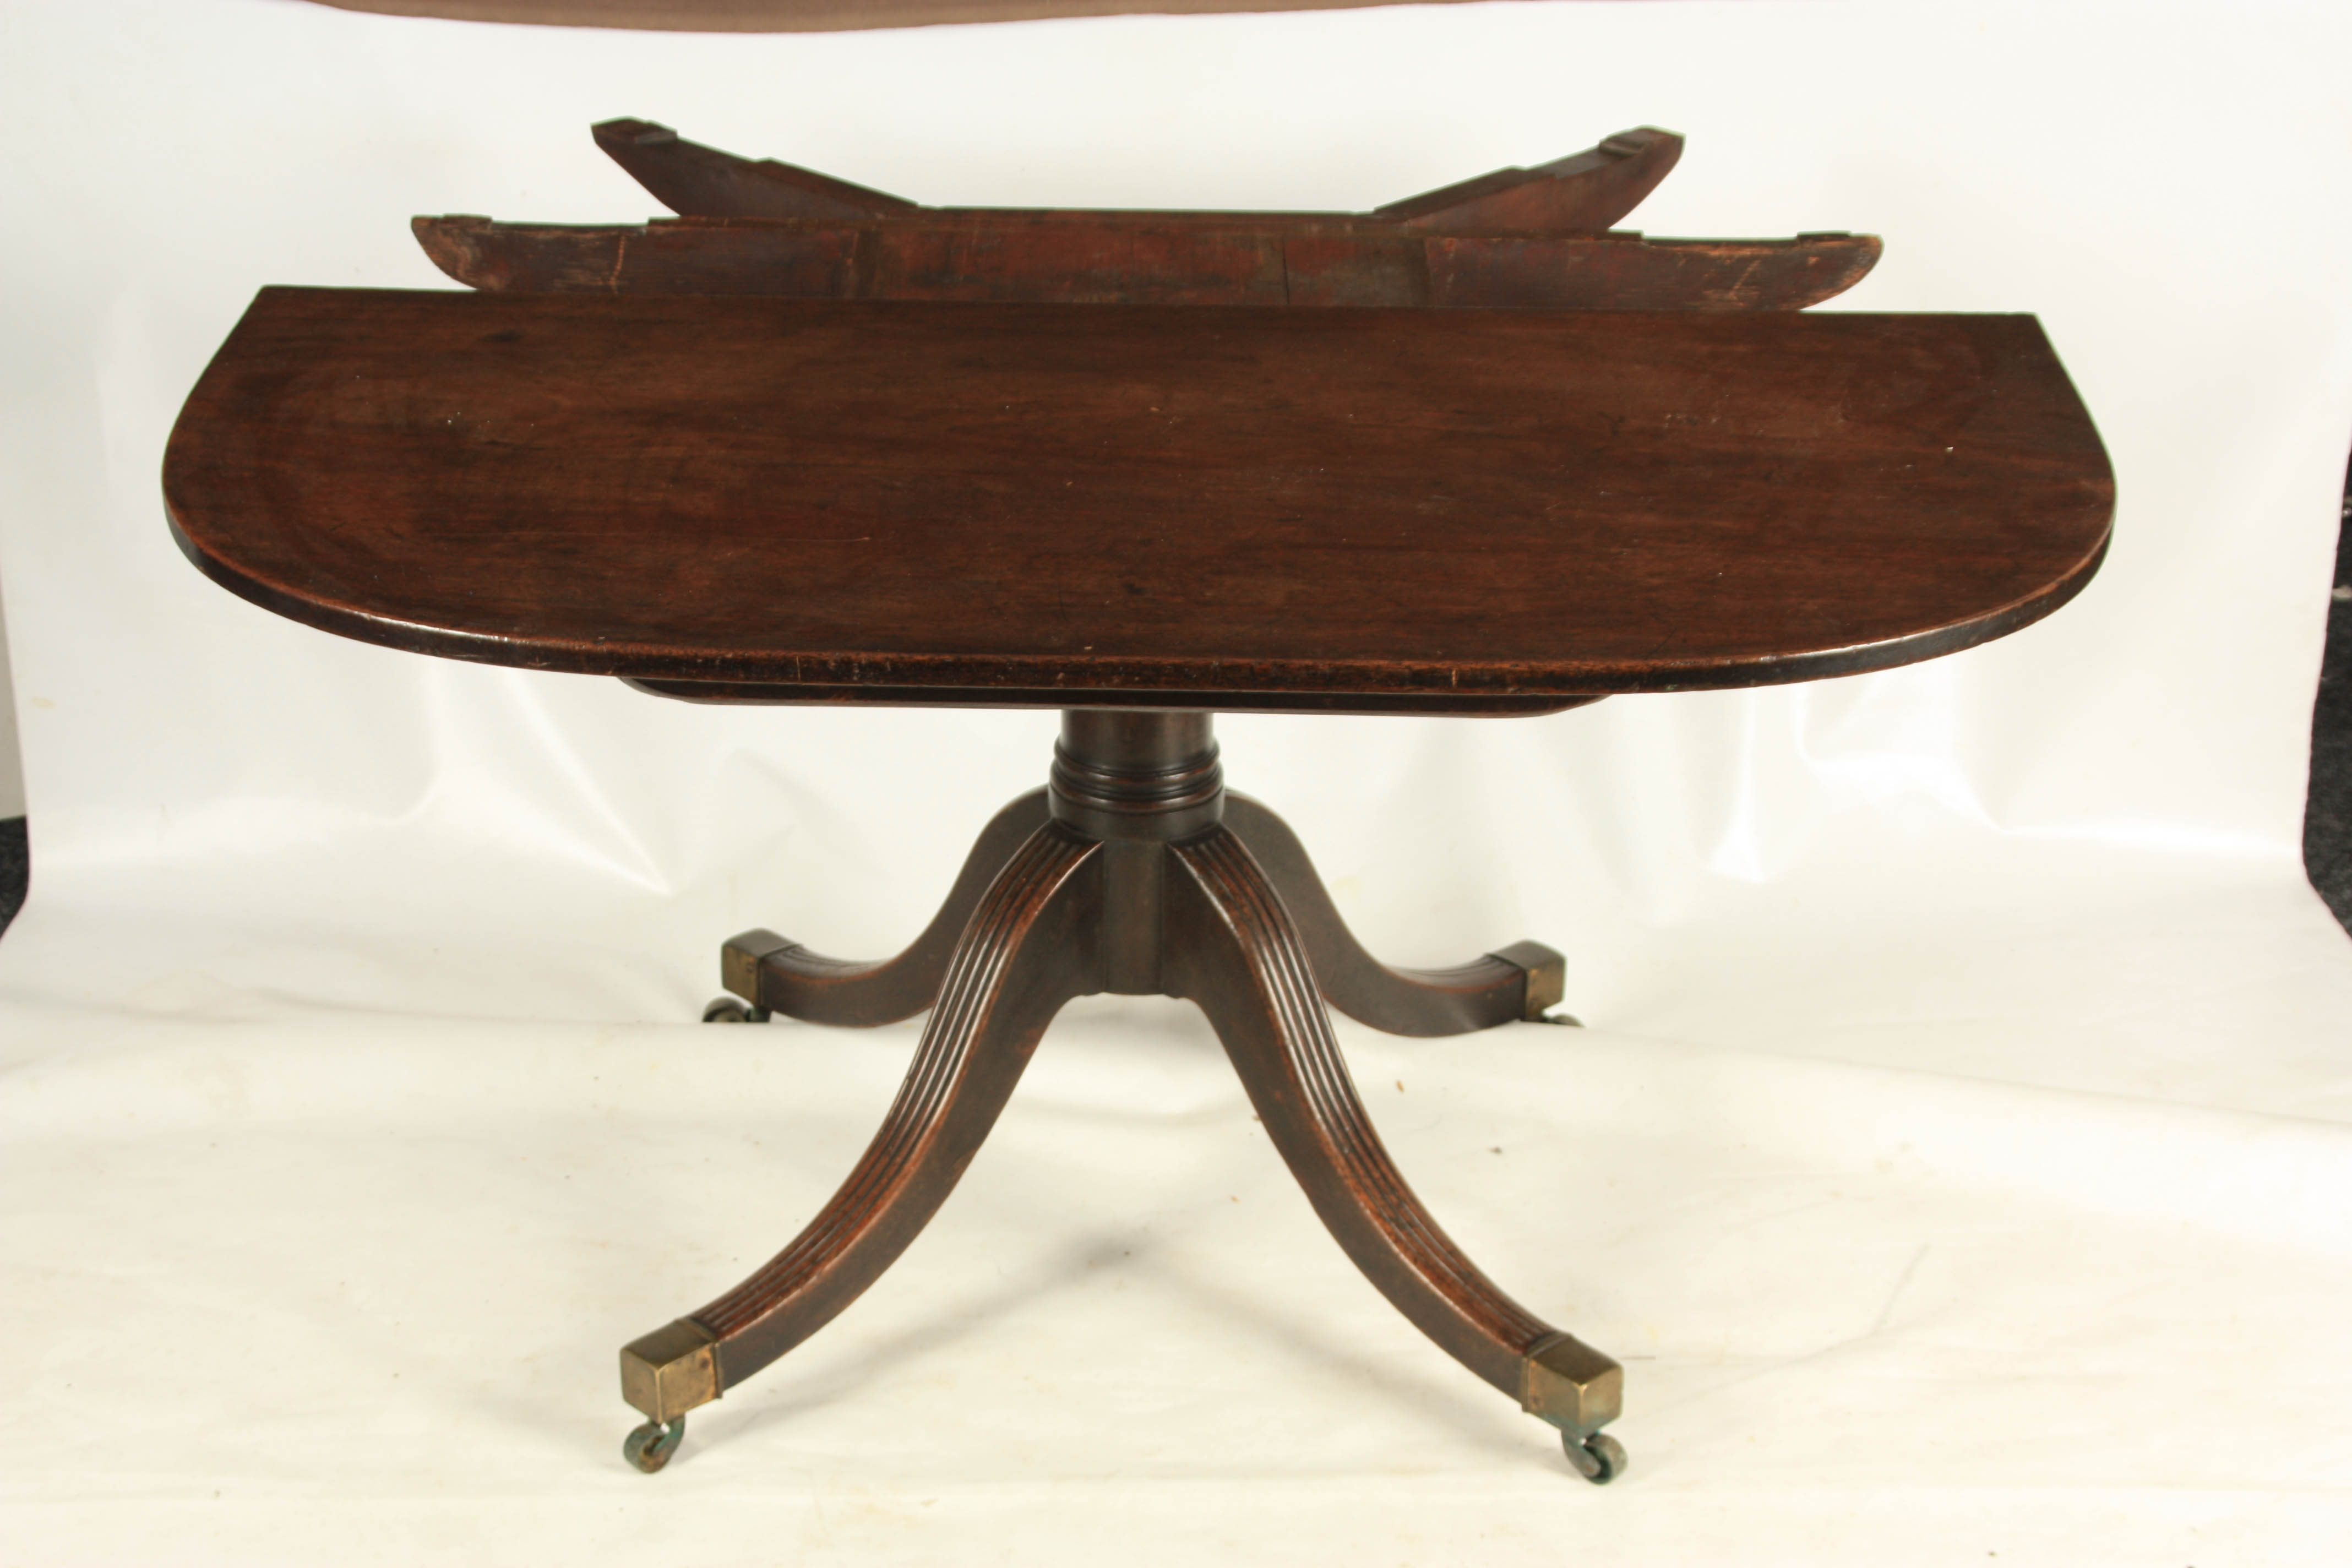 AN UNUSUAL MID 18TH CENTURY DROP LEAF PEDESTAL DINING TABLE with two-section top one being - Image 3 of 12